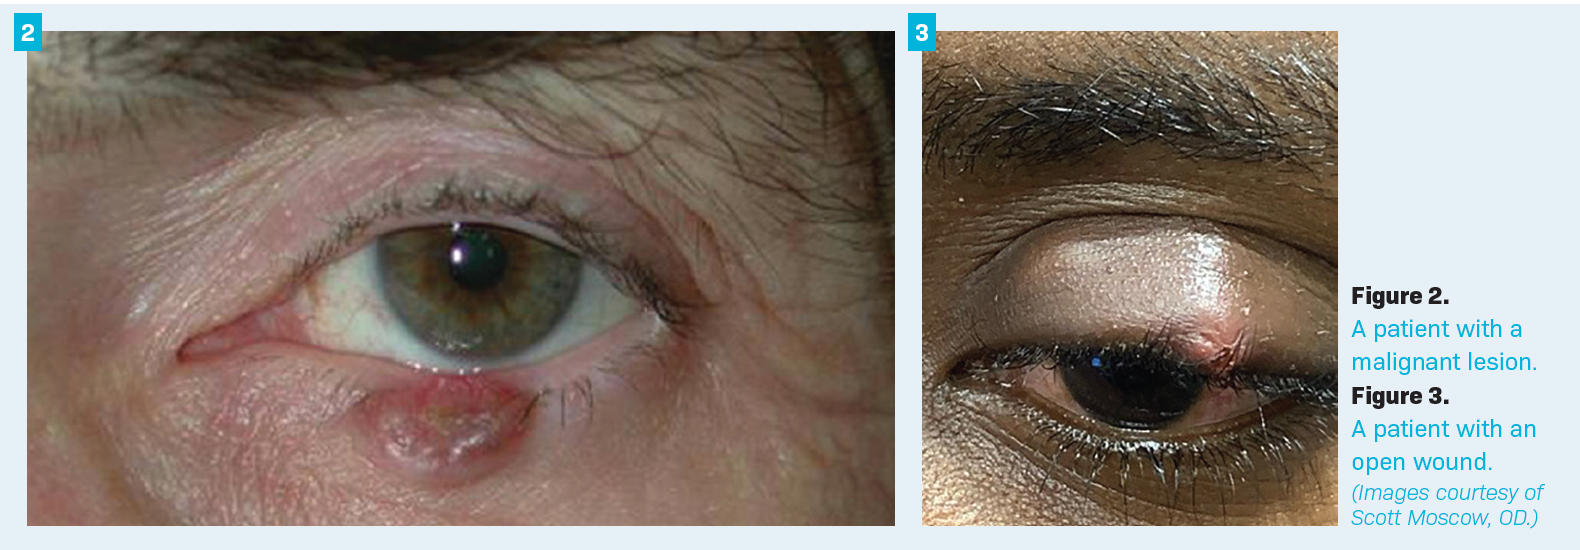 Figure 2. A patient with a malignant lesion. Figure 3. A patient with an open wound. (Images courtesy of Scott Moscow, OD.)